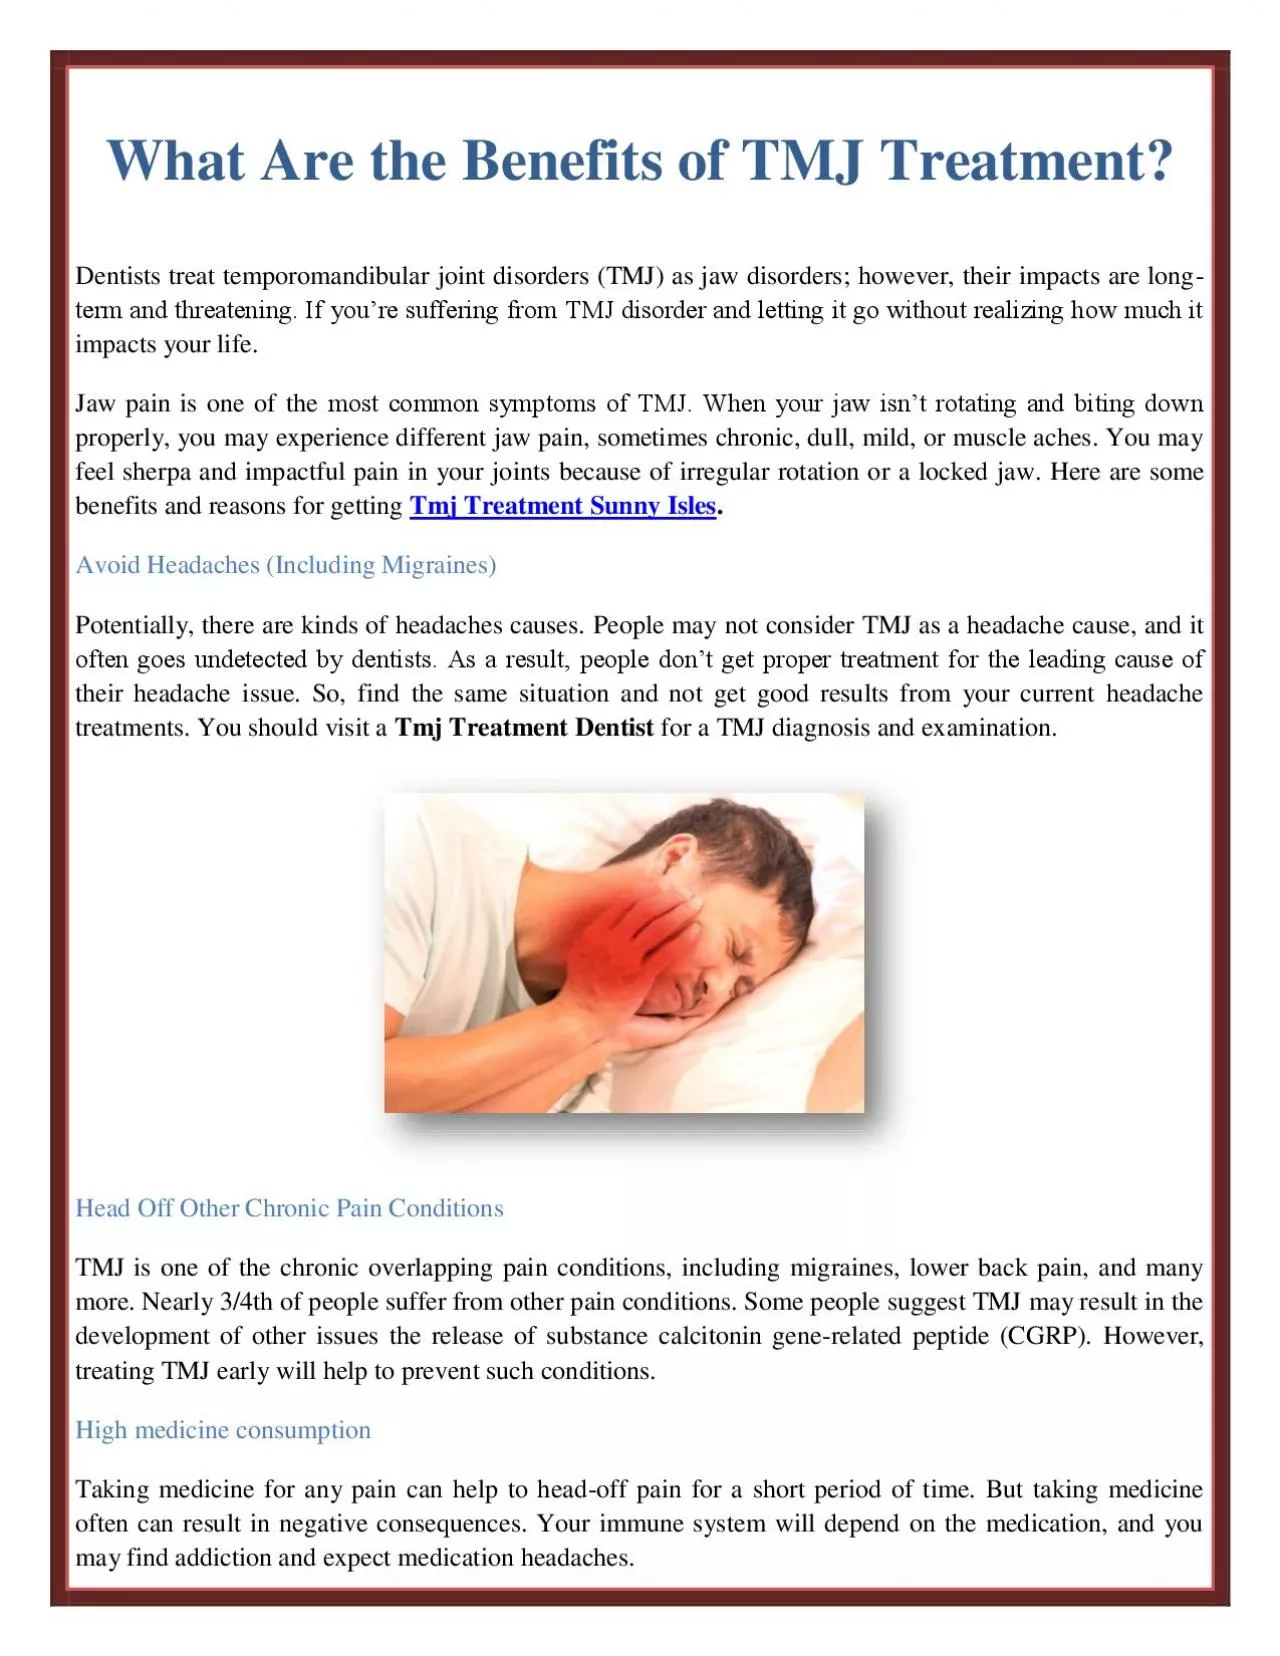 What Are the Benefits of TMJ Treatment?